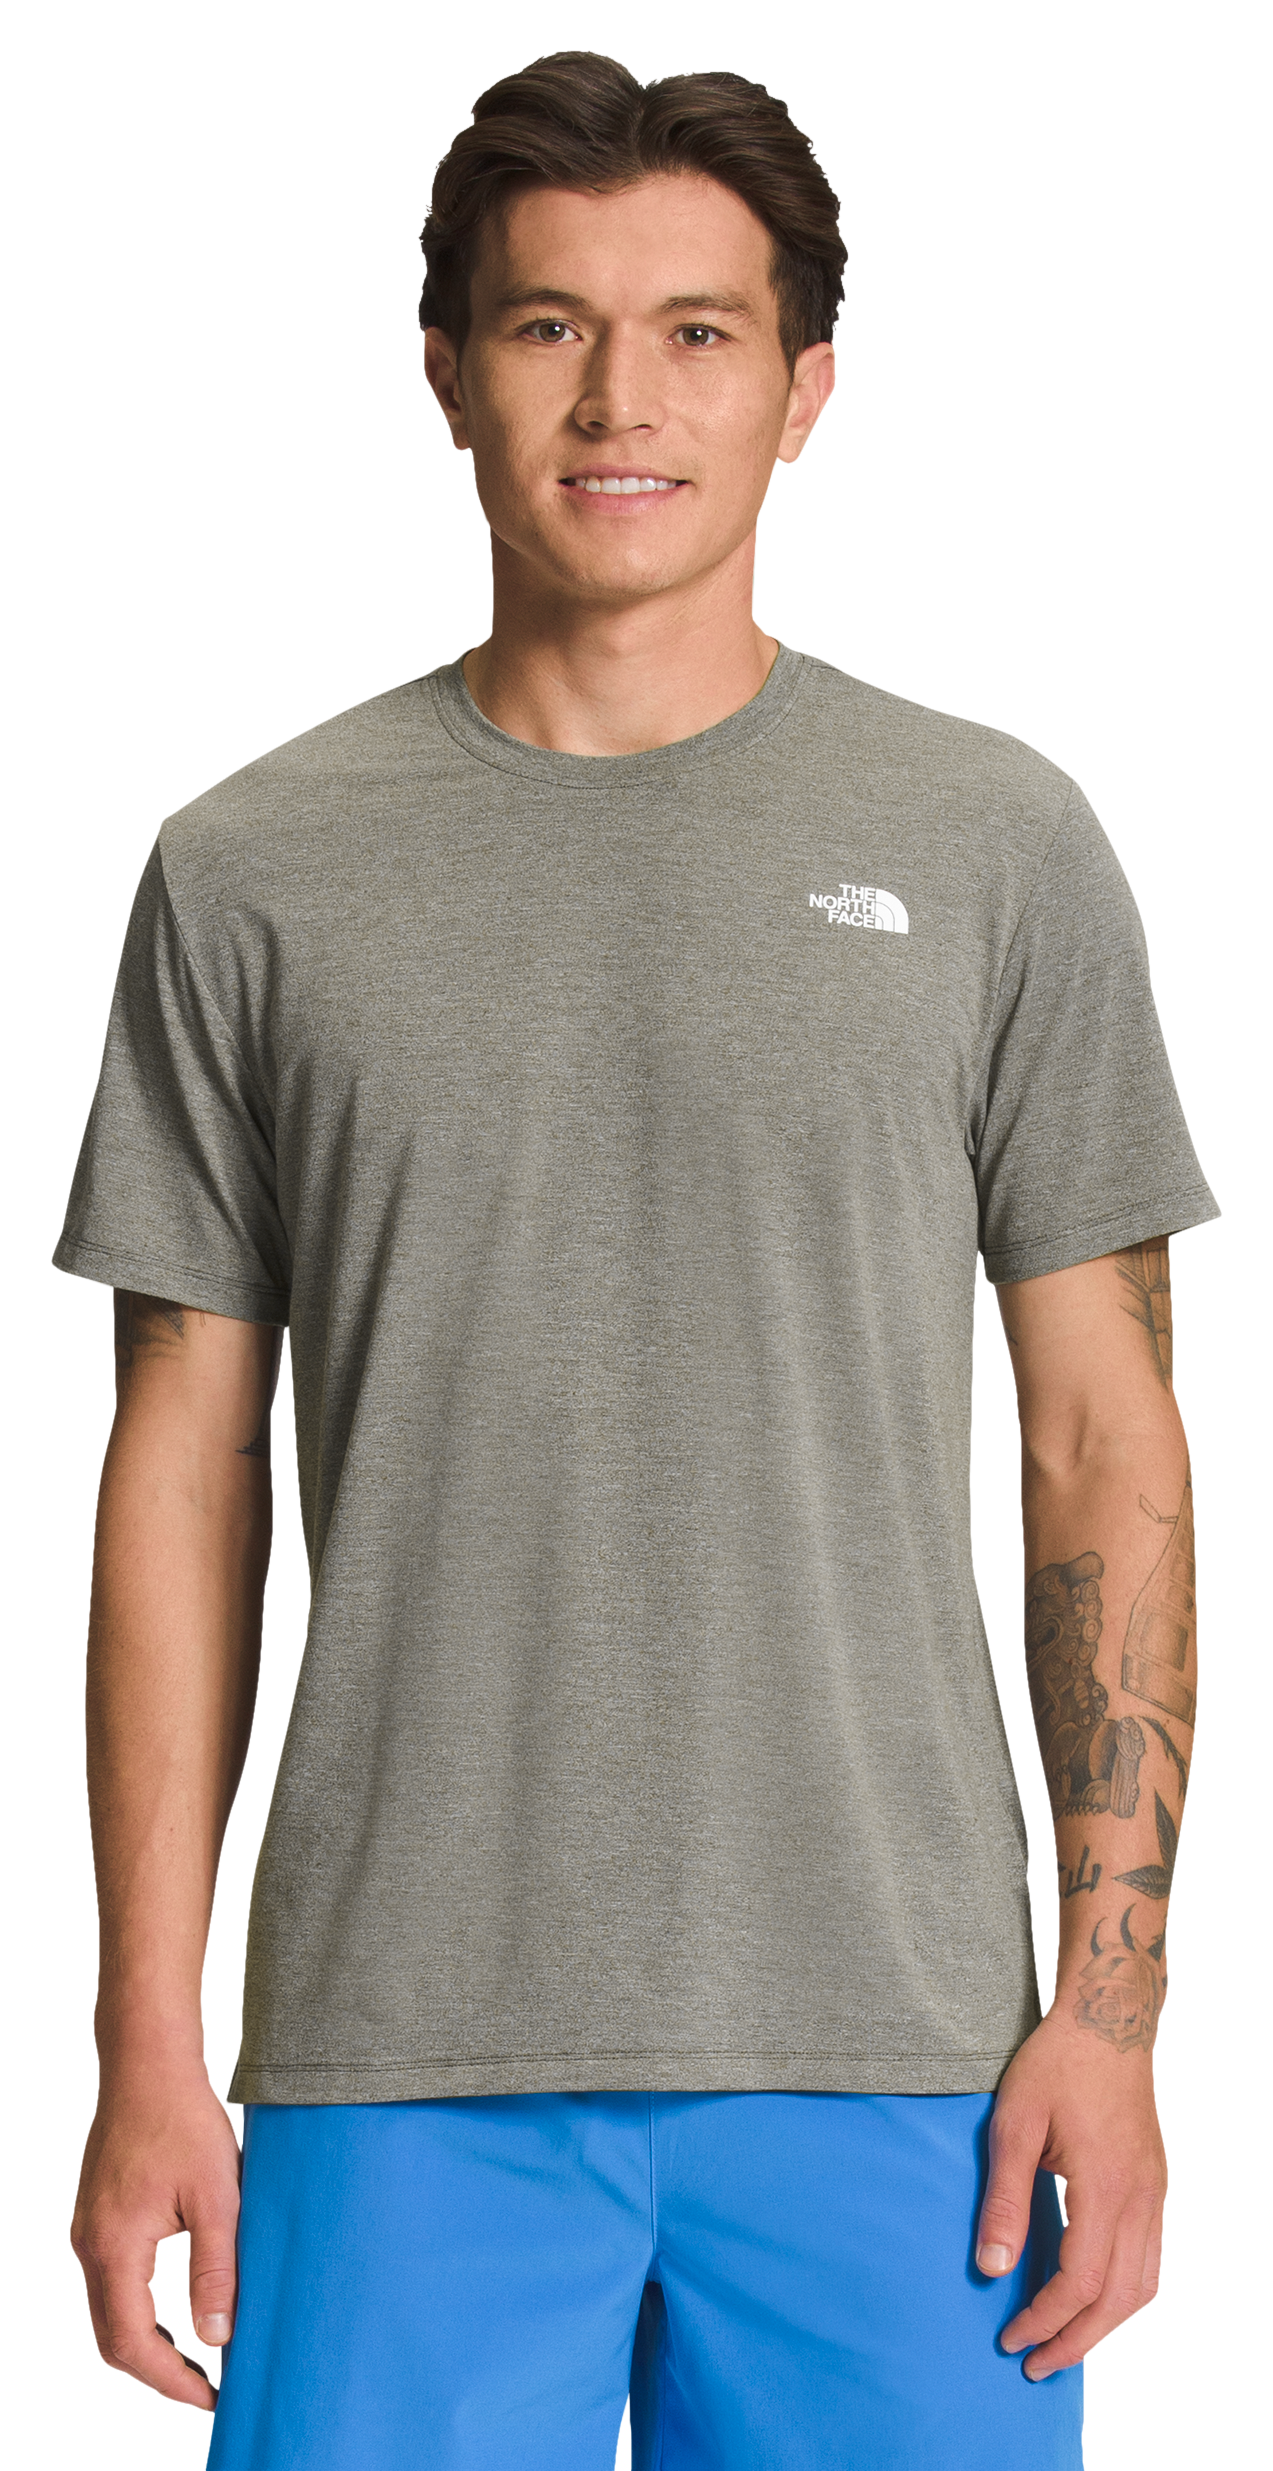 The North Face Wander Short-Sleeve Shirt for Men - New Taupe Green Heather - M